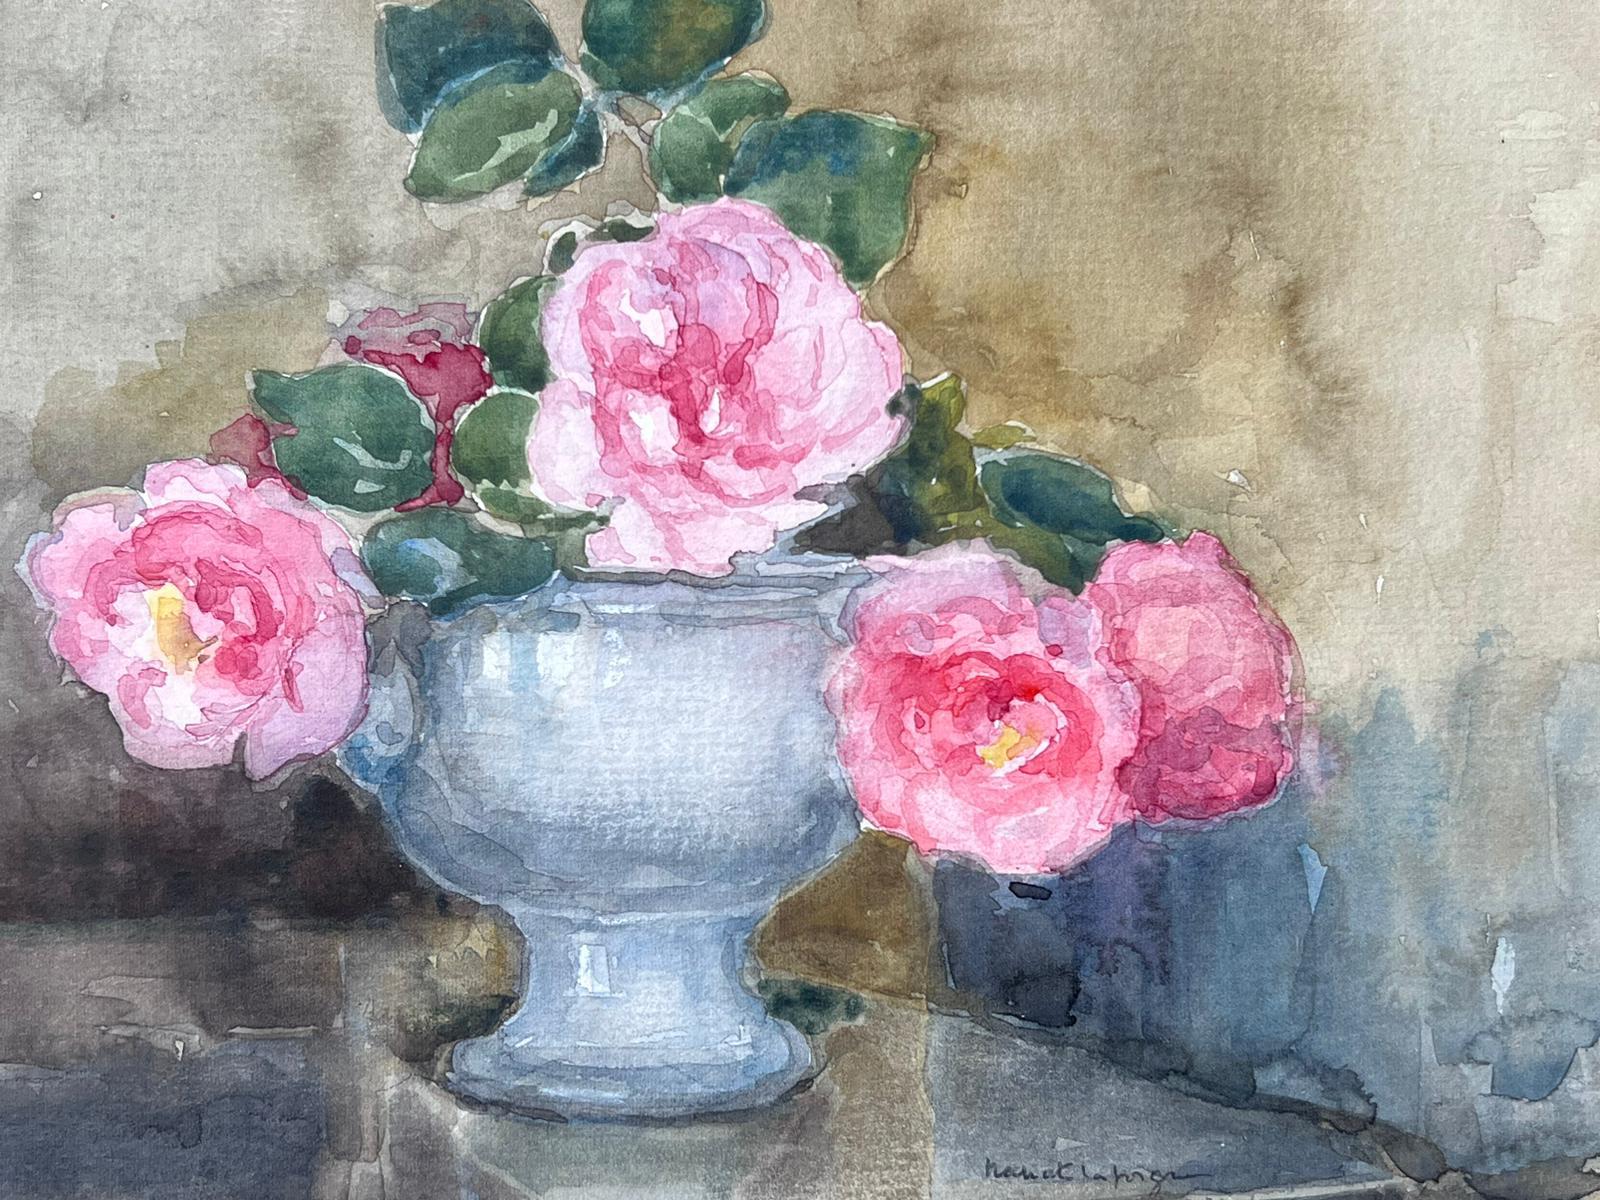 Bowl of Pink Roses Mid 20th Century French Post Impressionist Signed Painting For Sale 2